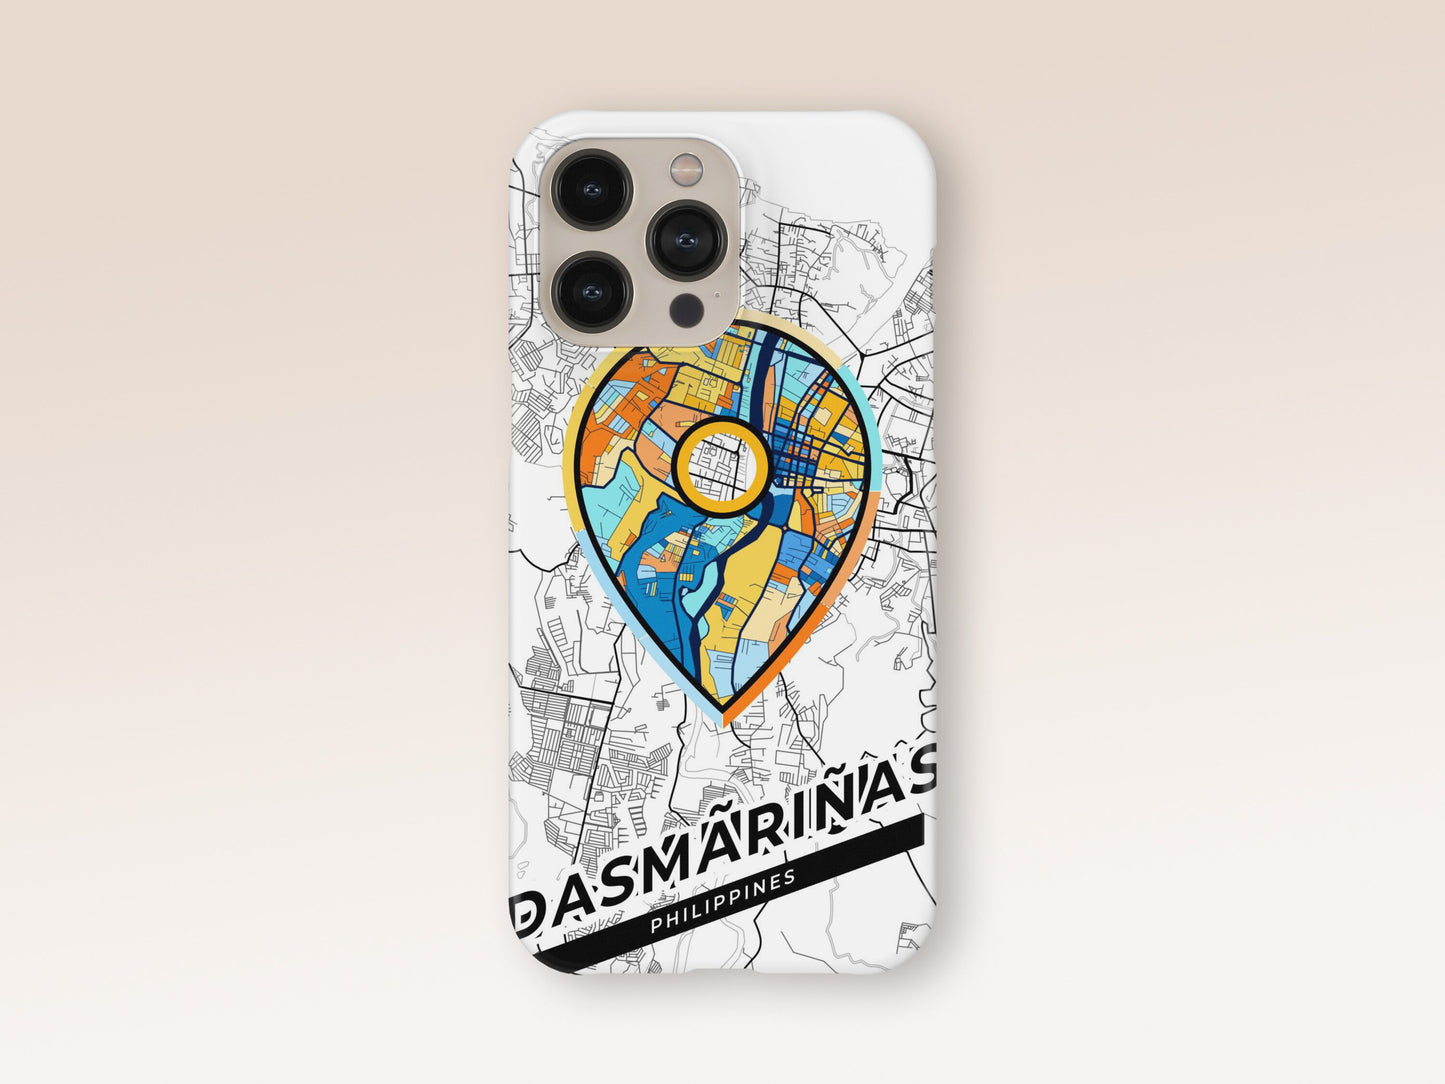 Dasmariñas Philippines slim phone case with colorful icon. Birthday, wedding or housewarming gift. Couple match cases. 1